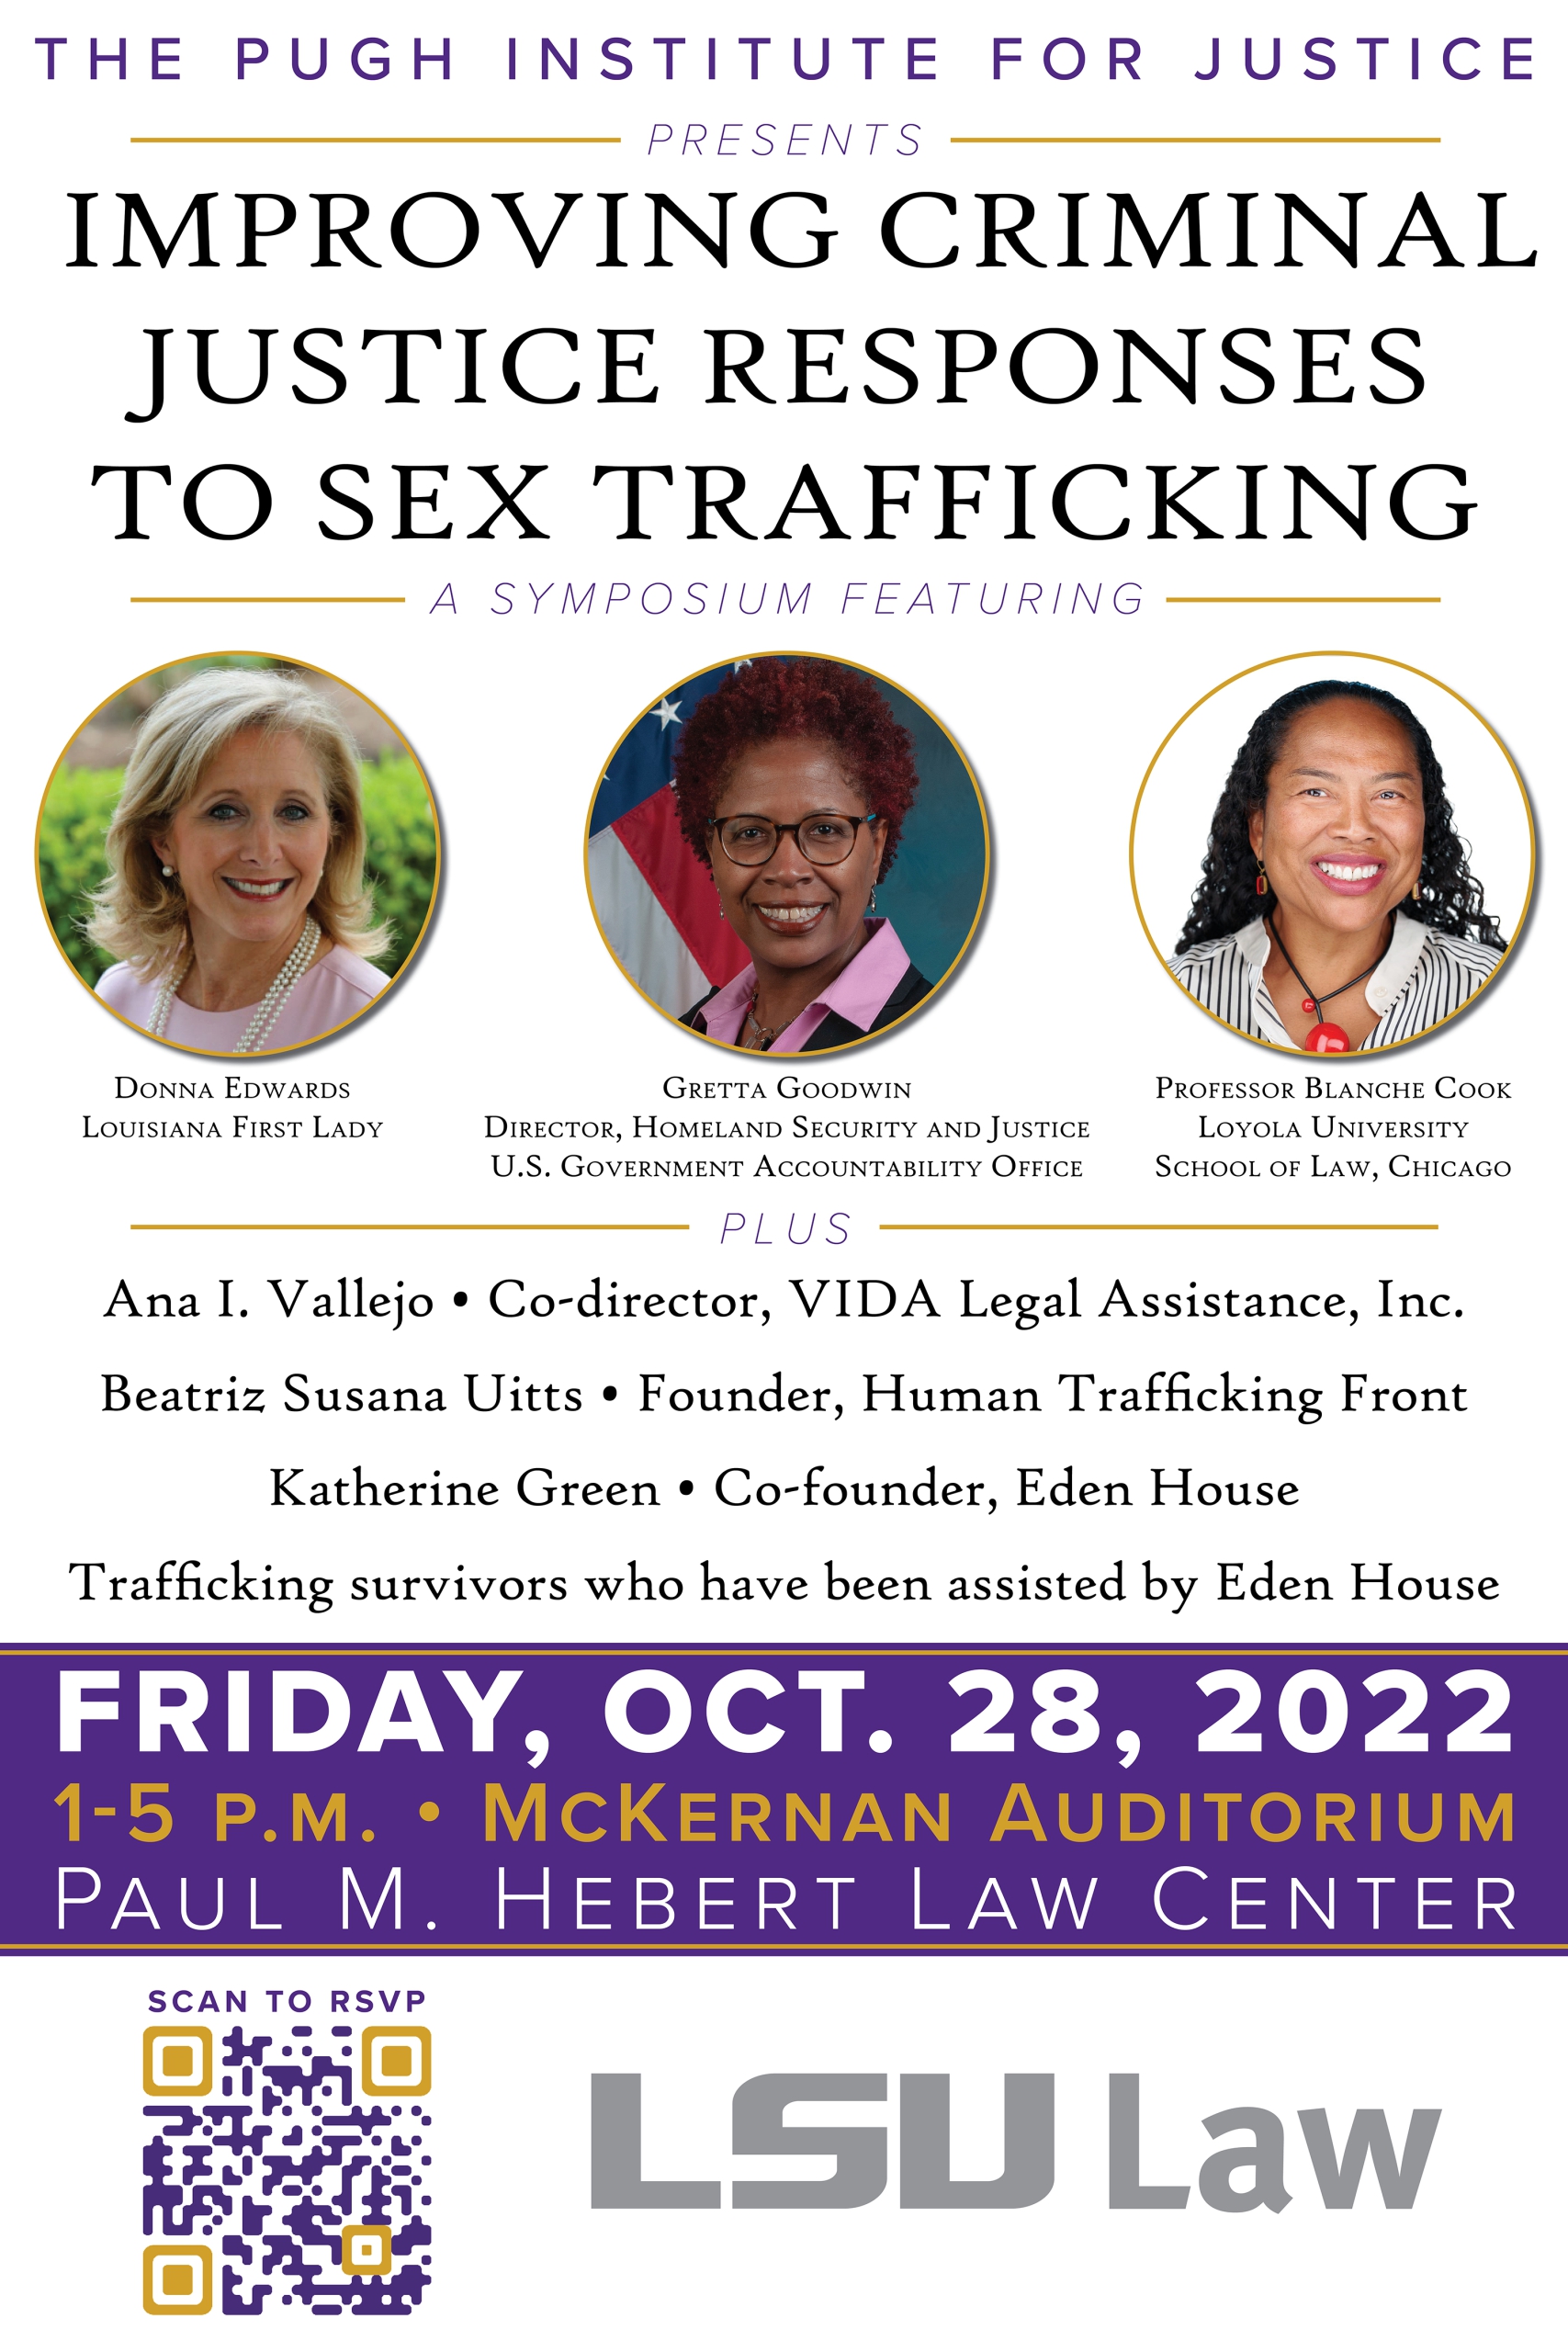 Louisiana First Lady Donna Edwards to join legal scholars, trafficking survivors, and service providers at “Improving Criminal Justice Responses to Sex Trafficking” symposium at LSU Law on Friday,